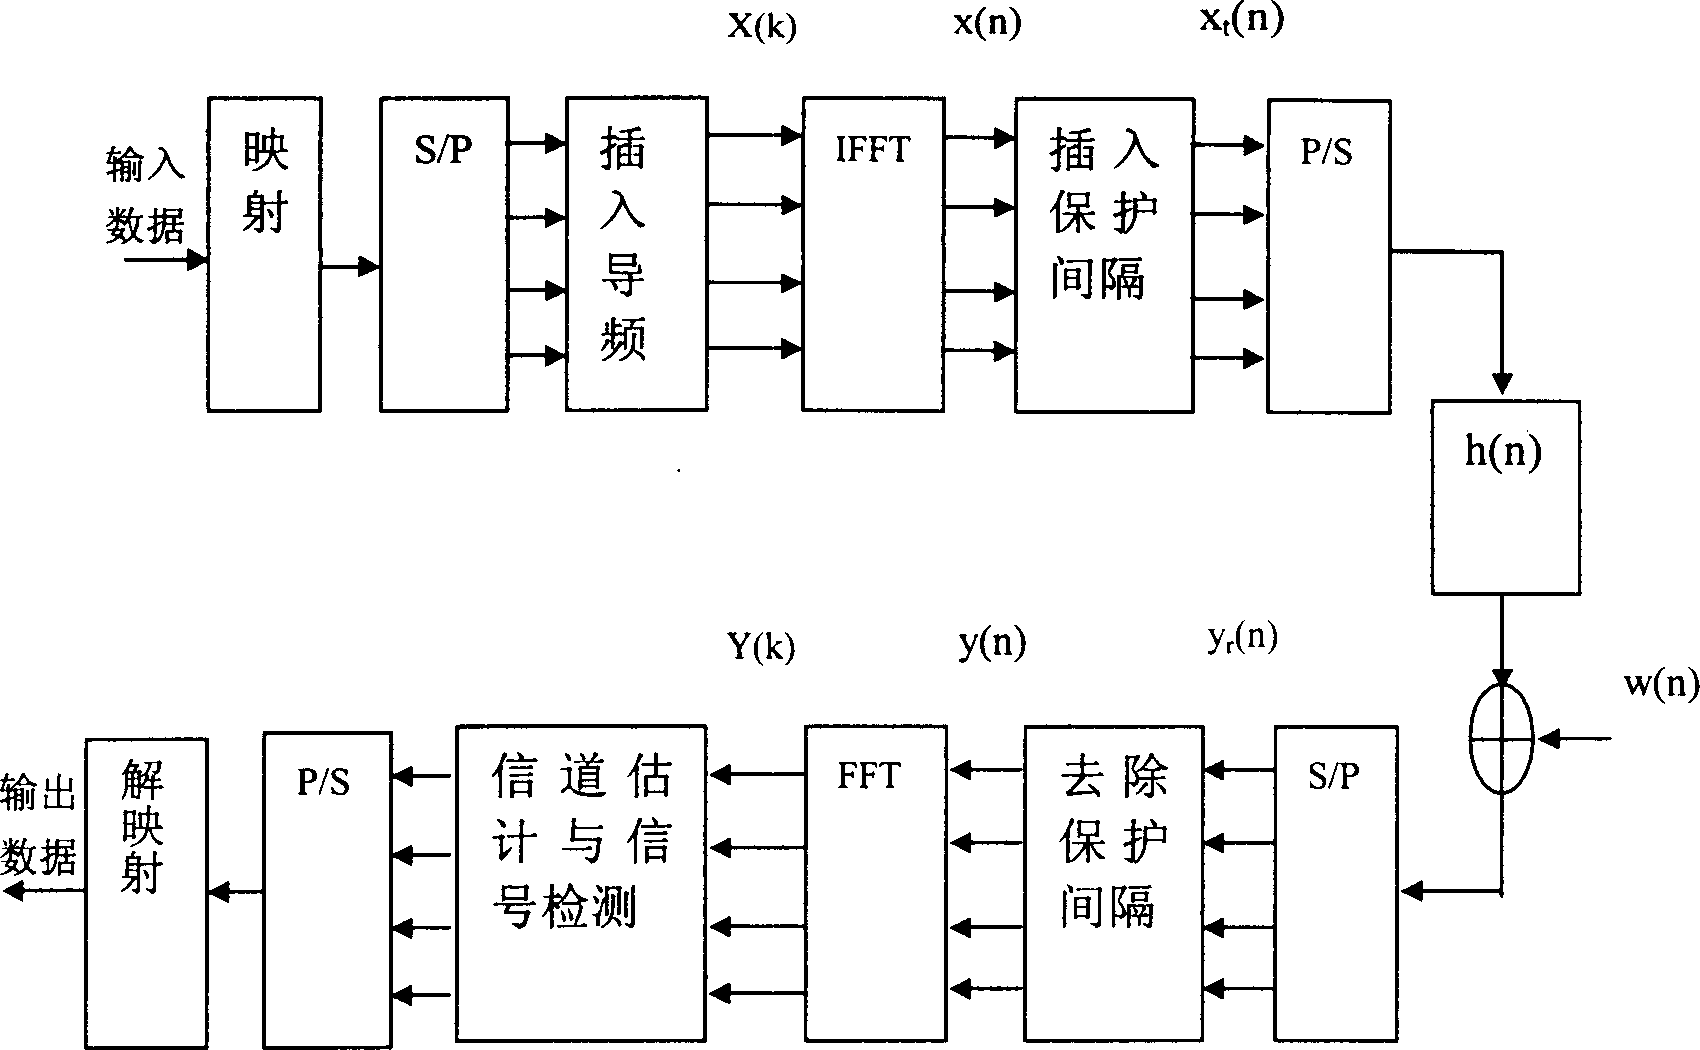 Method for compatible OFDM technology by TD-SCDMA system